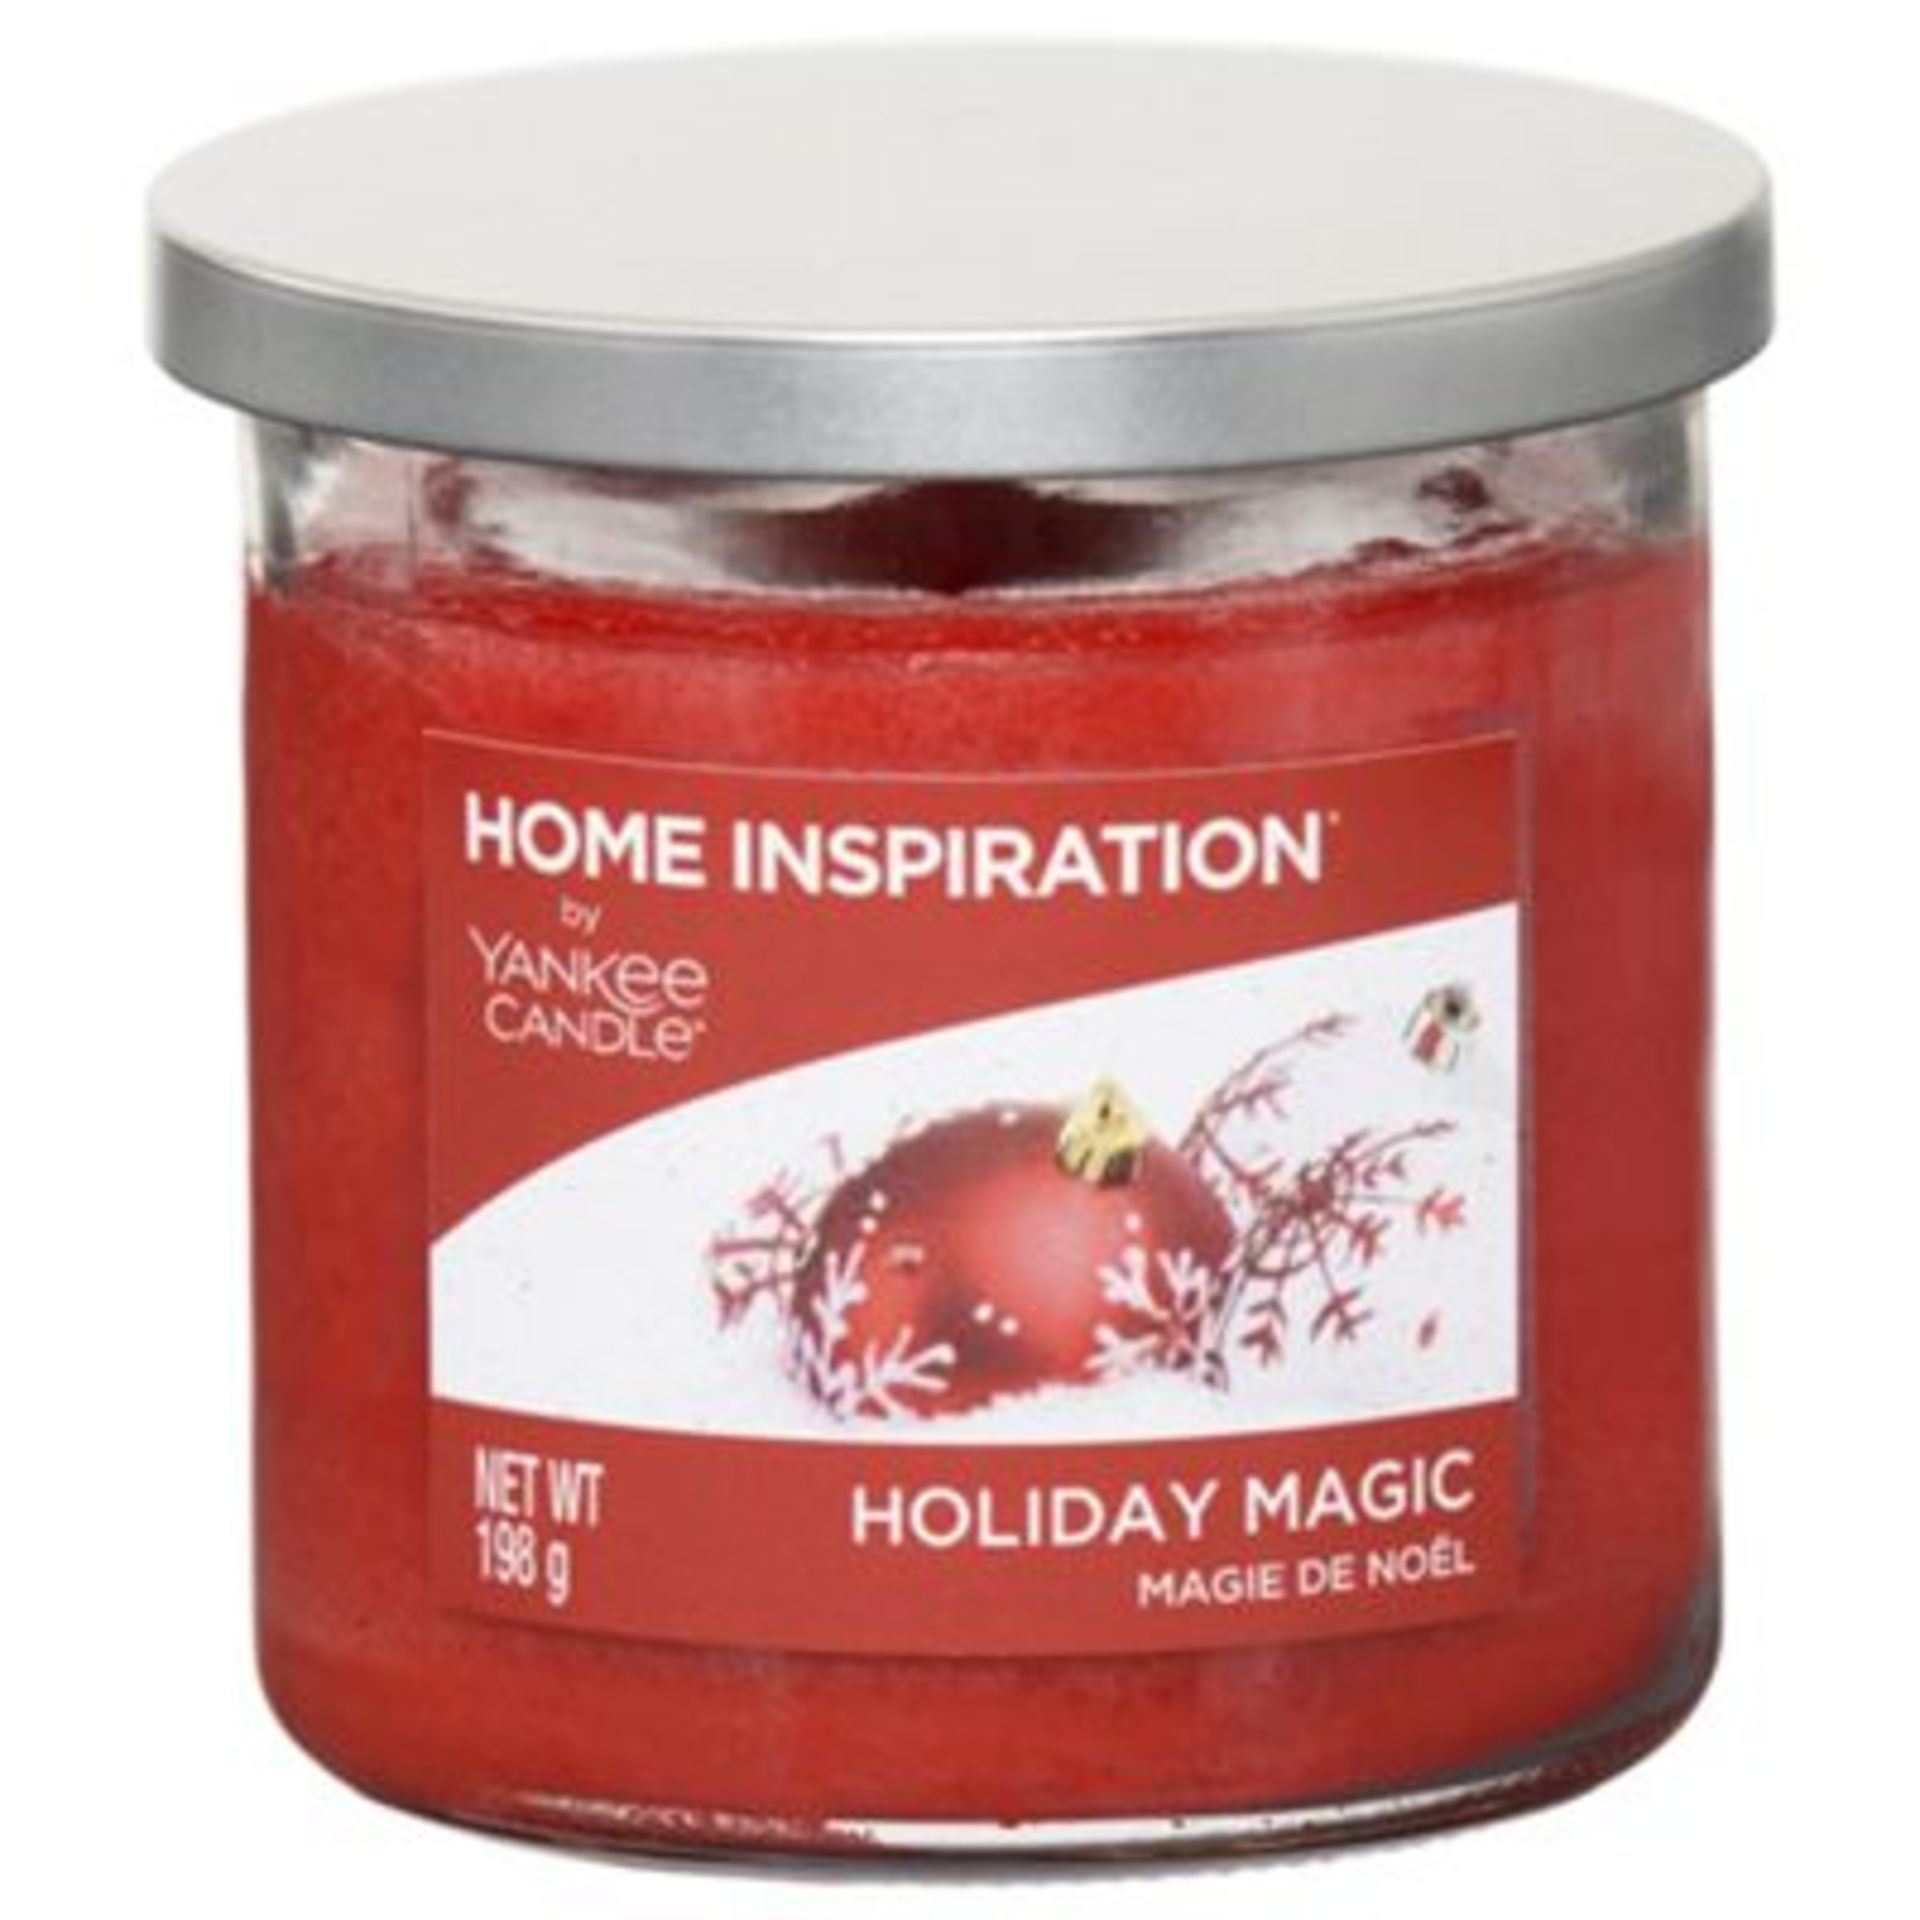 + VAT Brand New Home Inspiration by Yankee Candle Holiday Magic 198g Tumbler Candle - ISP £7.99